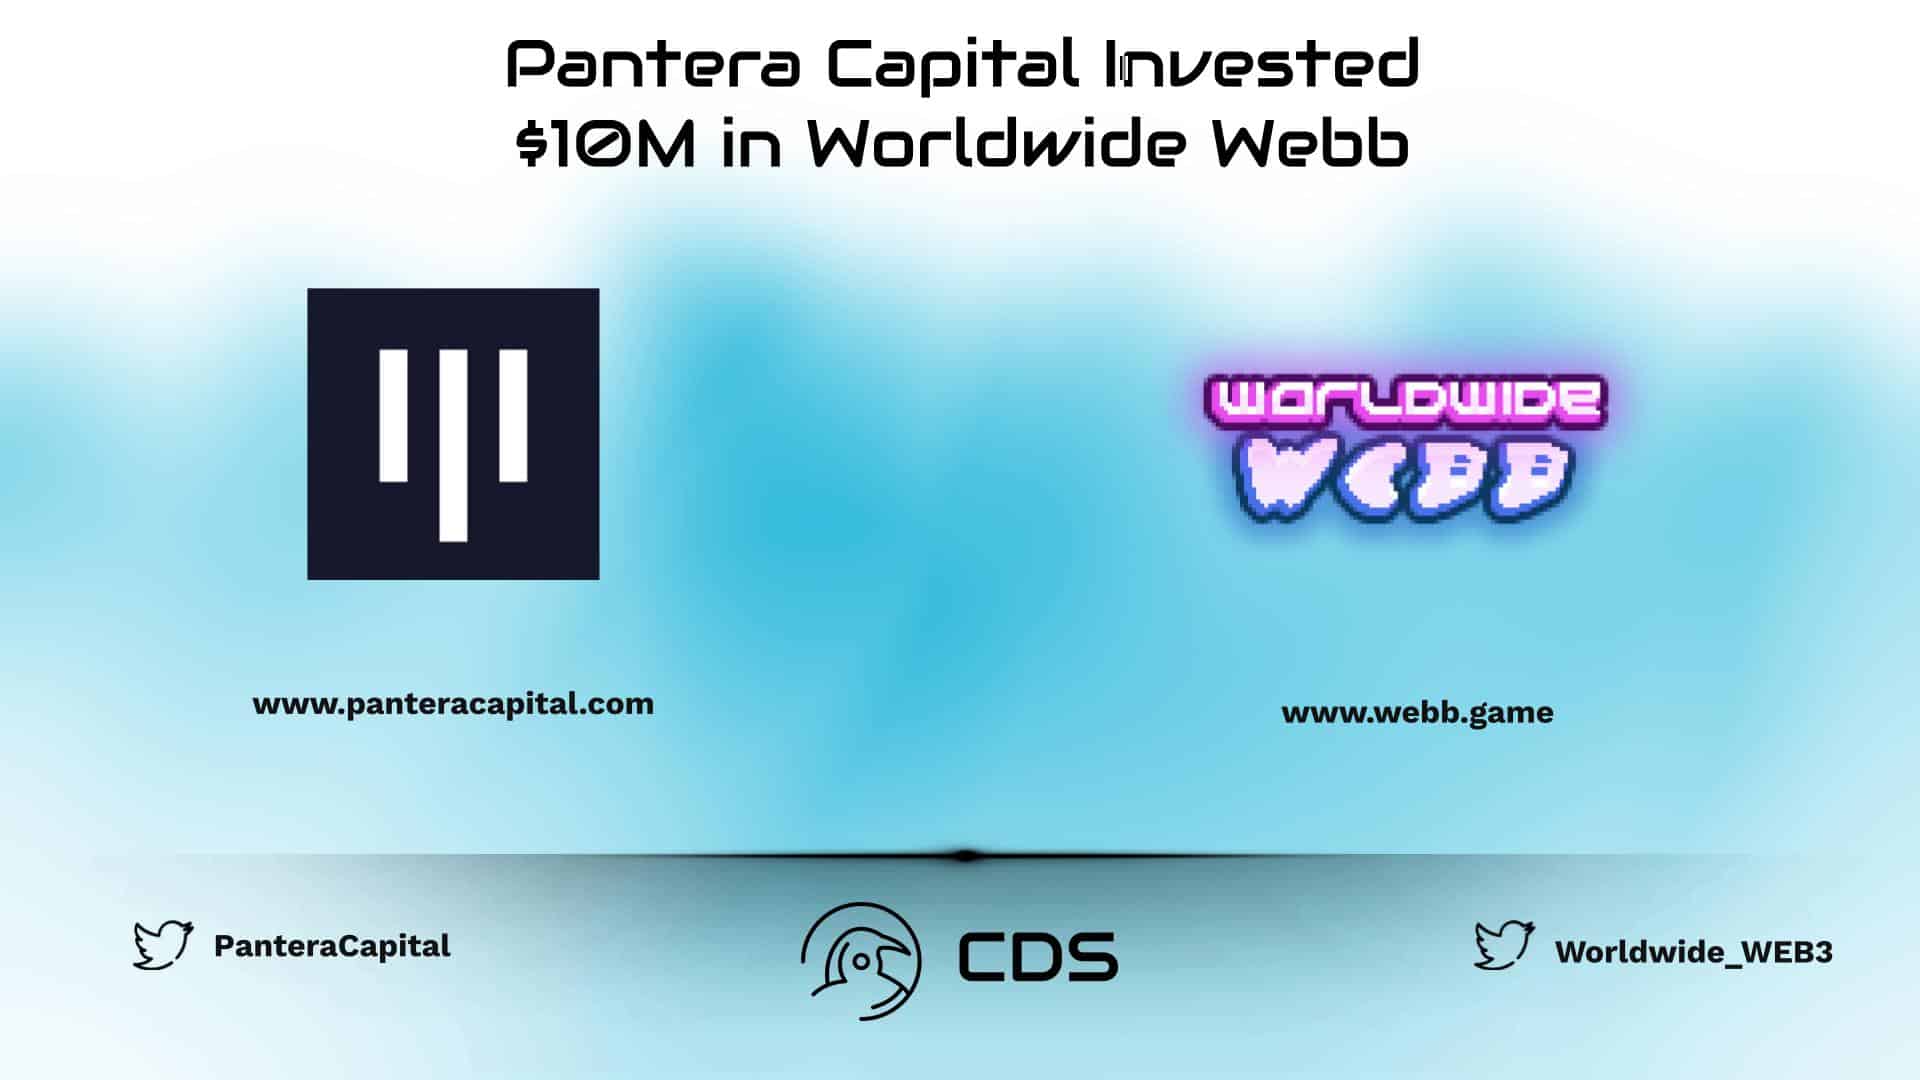 Pantera Capital Invested $10M in Worldwide Webb